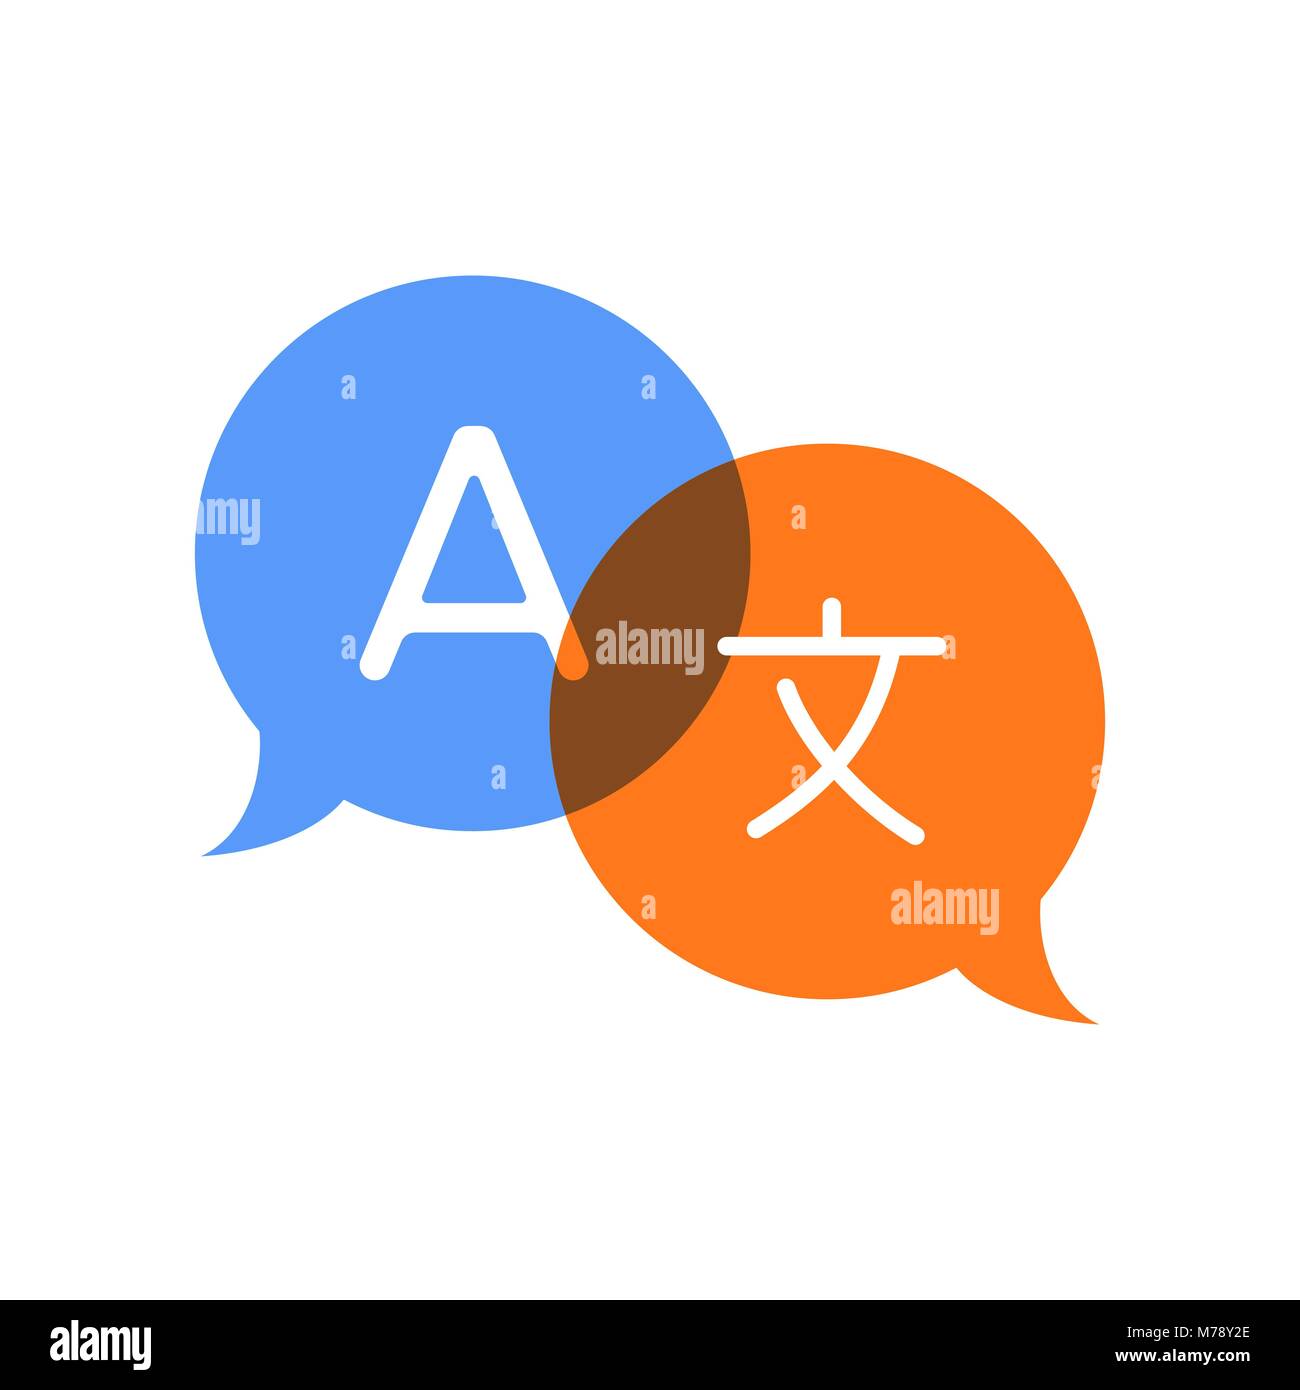 Speech social bubbles with translate icon. Concept illustration for translation idea or international communication. EPS10 vector. Stock Vector